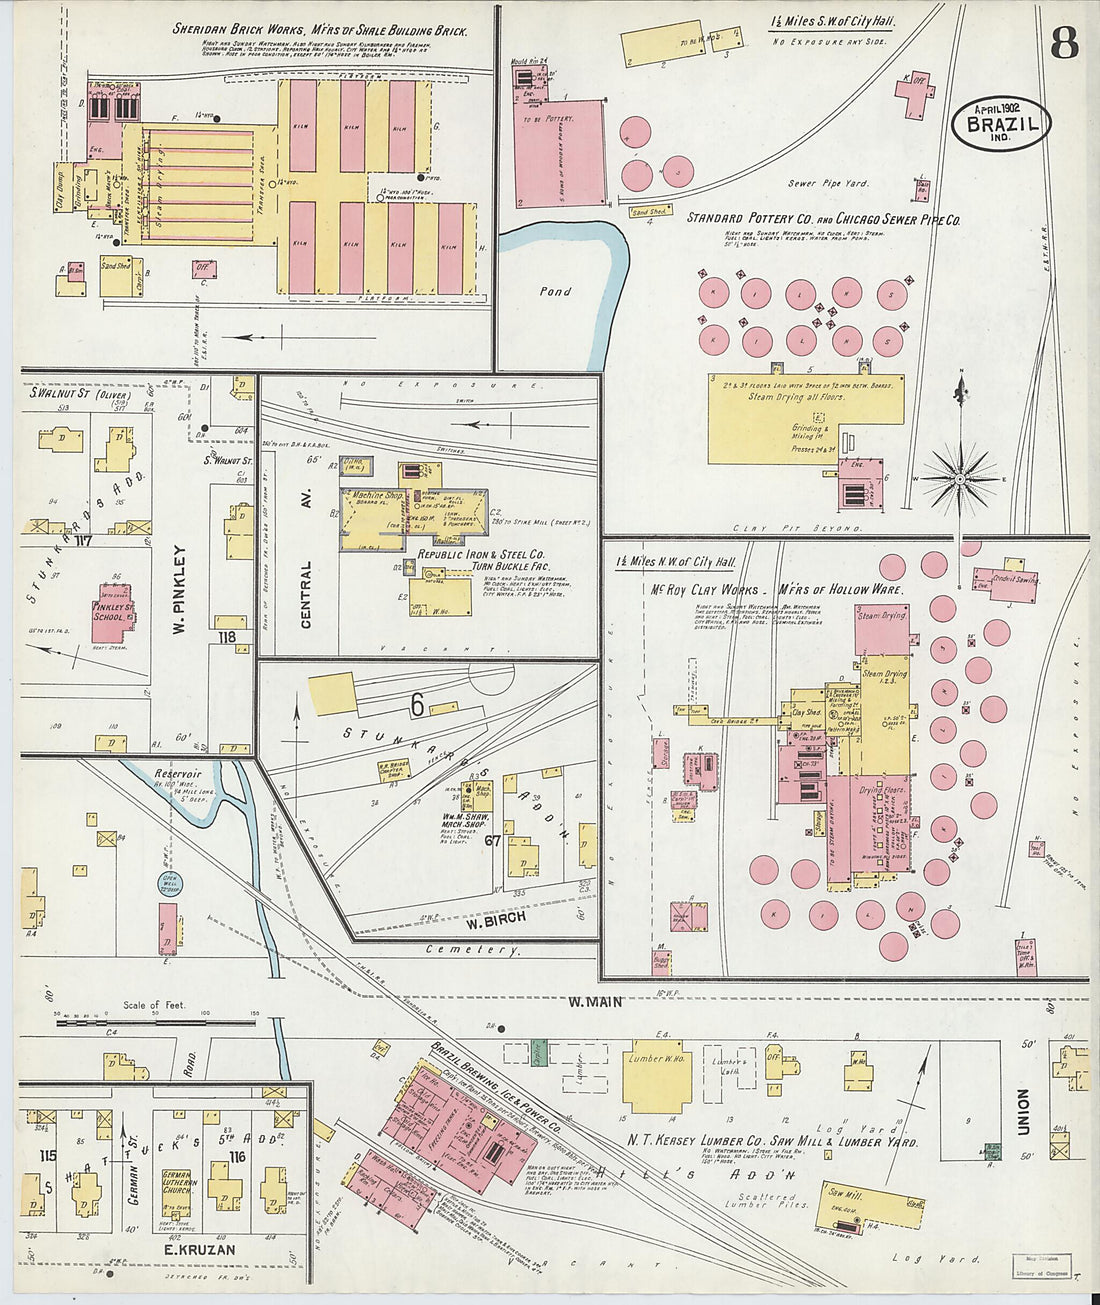 This old map of Brazil, Clay County, Indiana was created by Sanborn Map Company in 1902